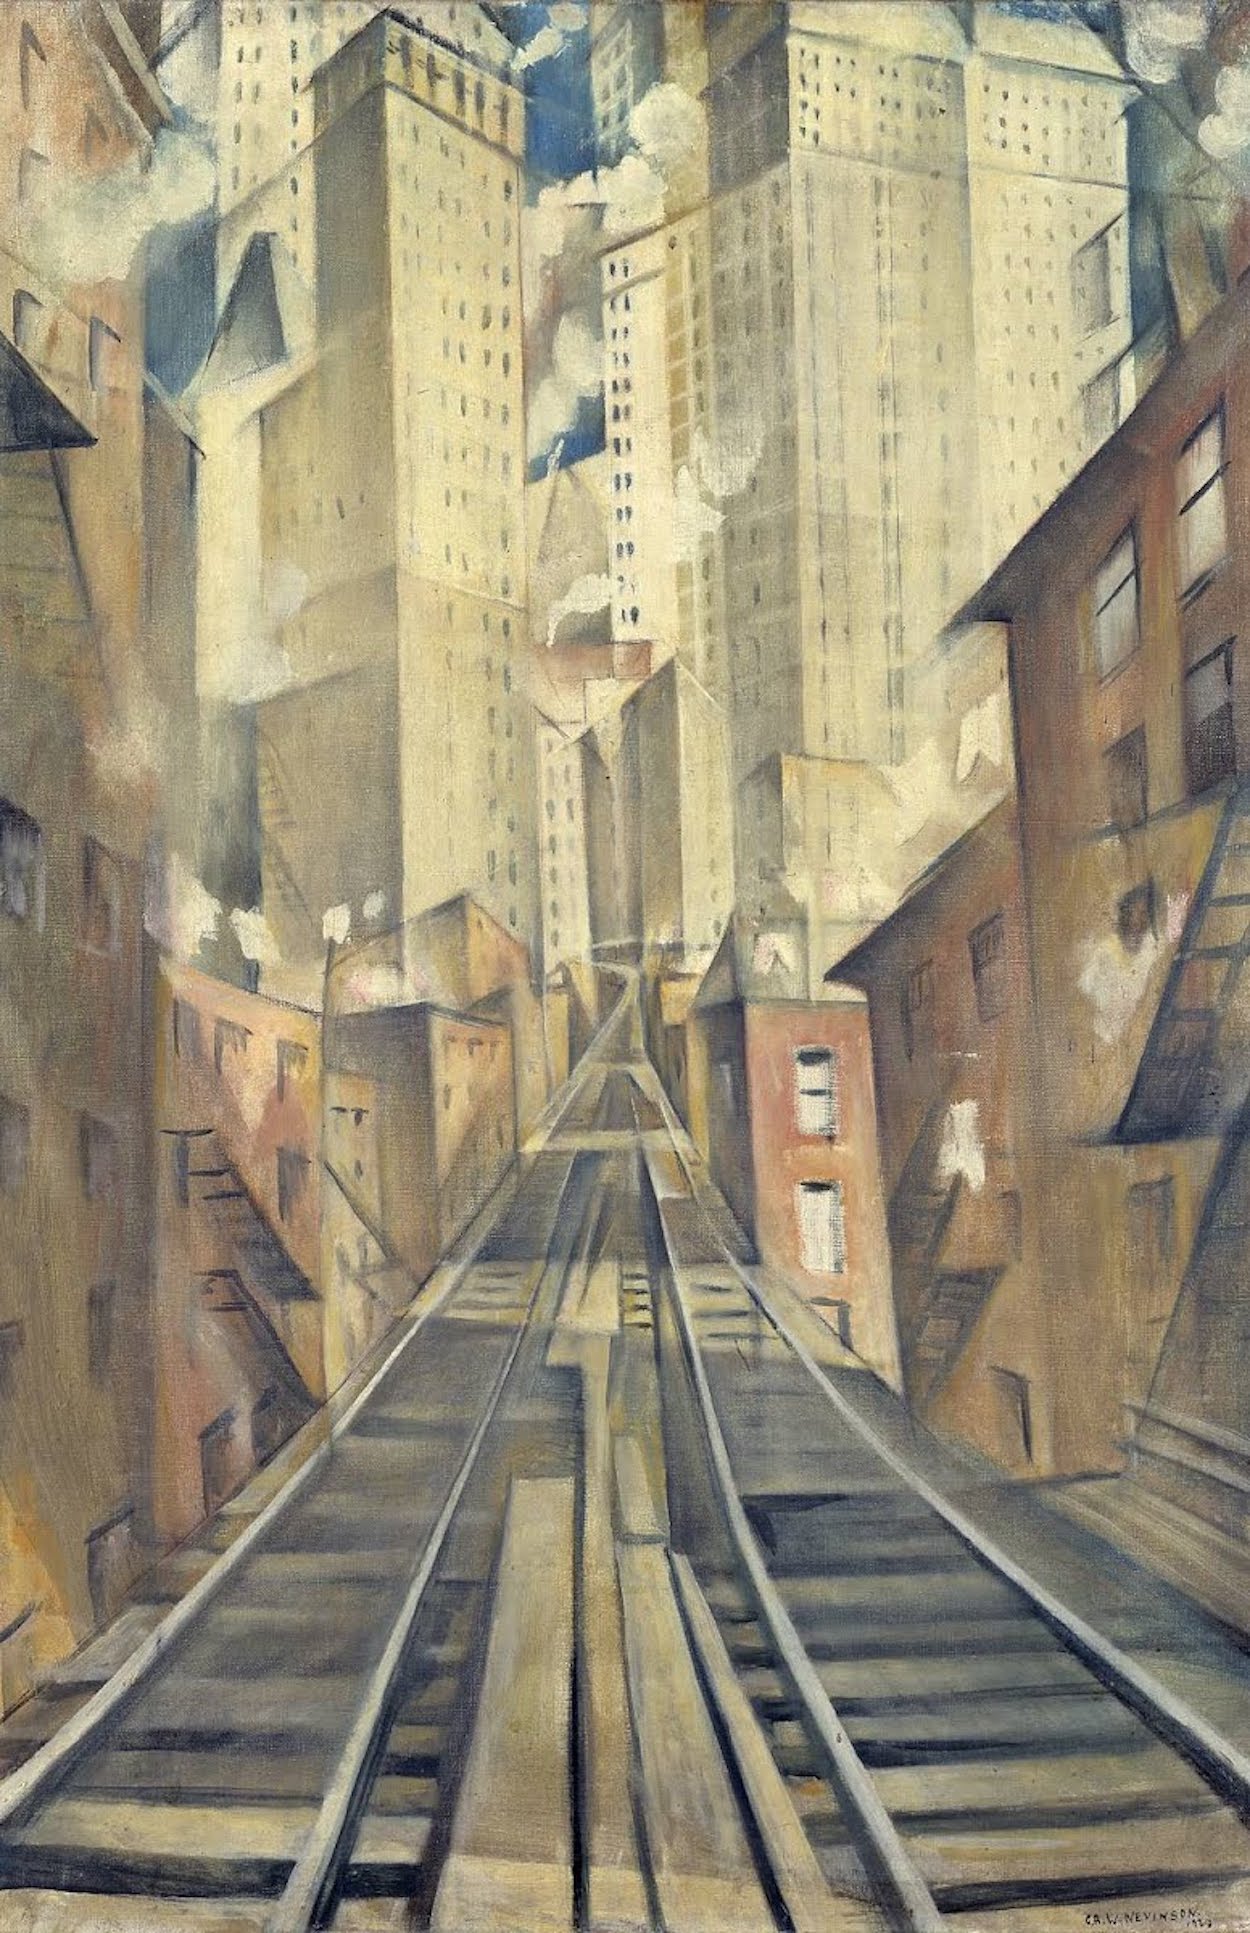 The Soul of the Soulless City by Christopher R. W. Nevinson - 1920 - 91.5 x 60.8 cm Tate Britain